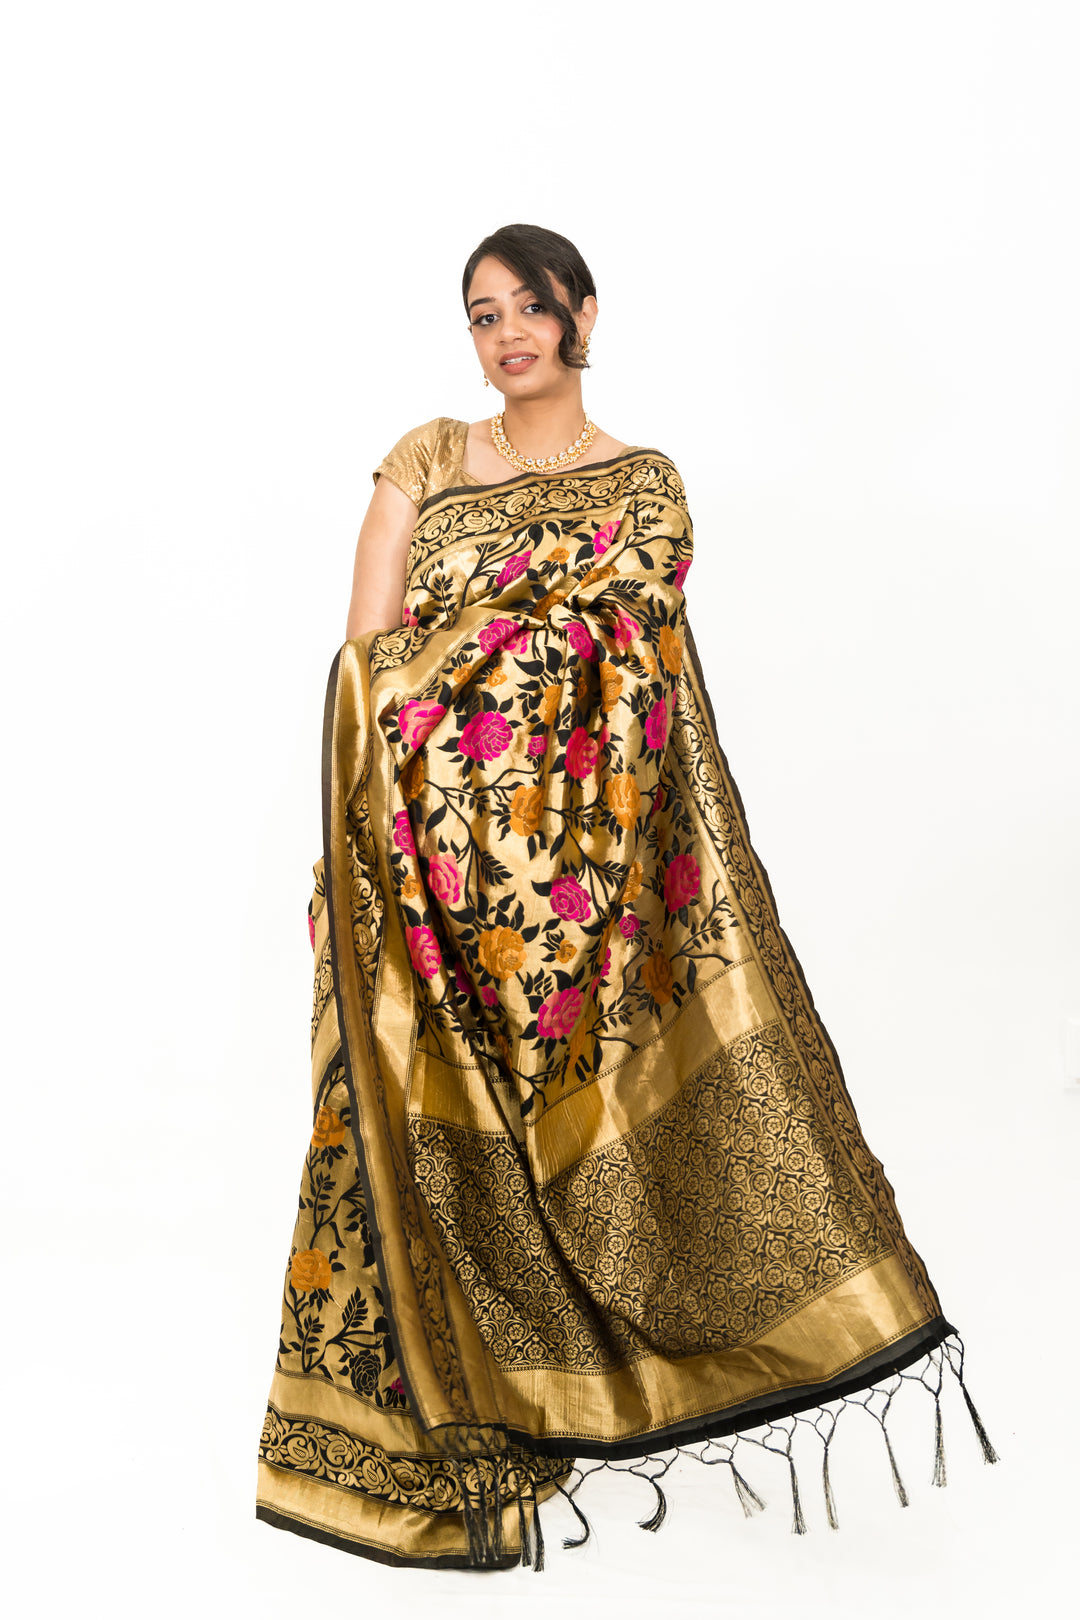 Black Floral Embroidery Saree